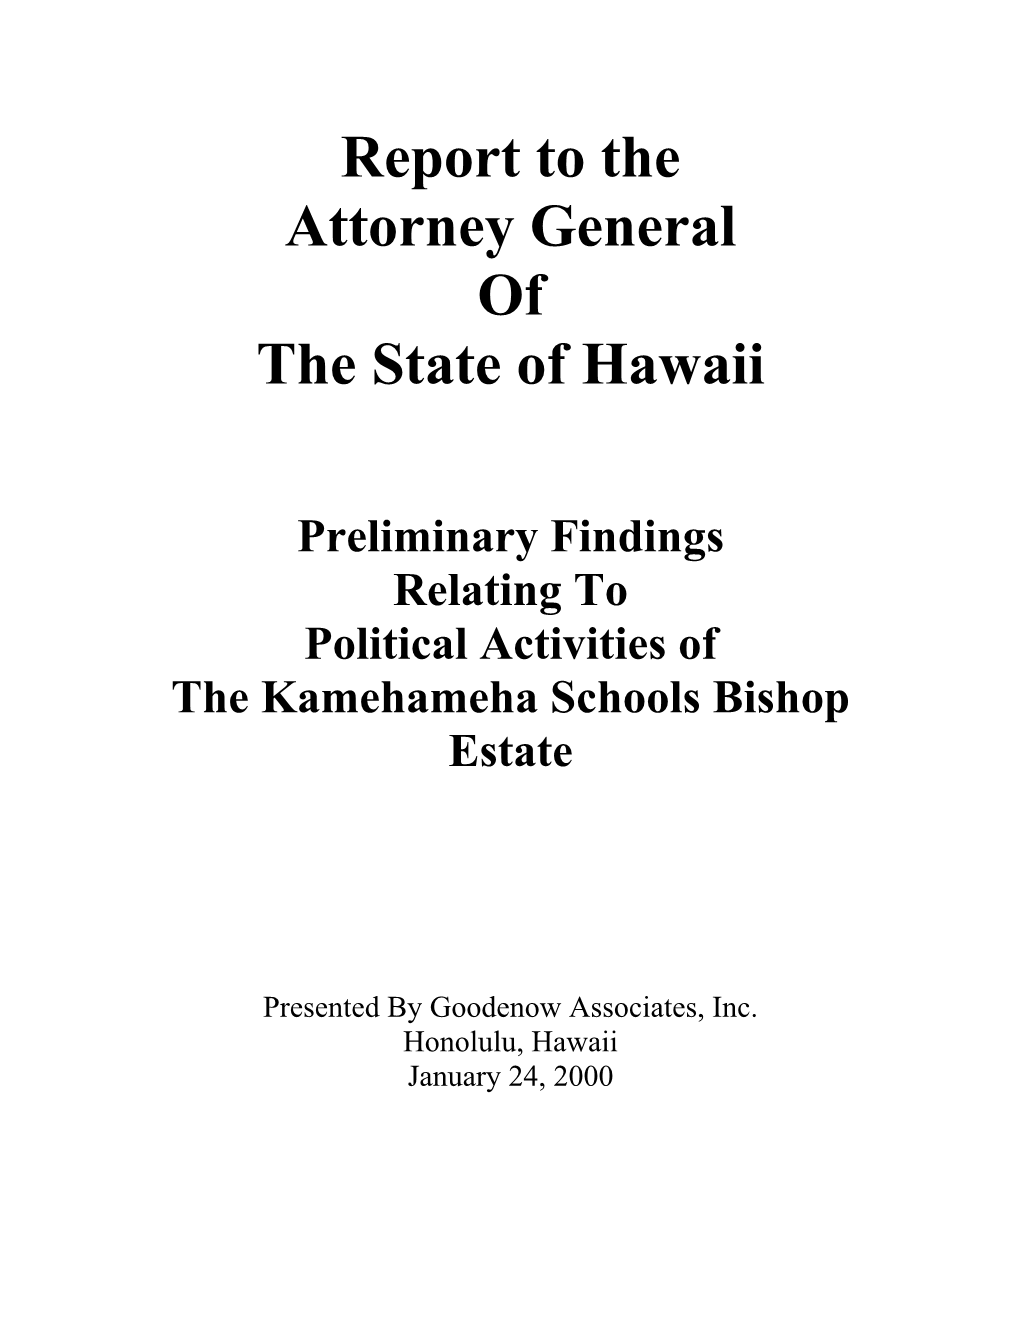 Report to the Attorney General of the State of Hawaii